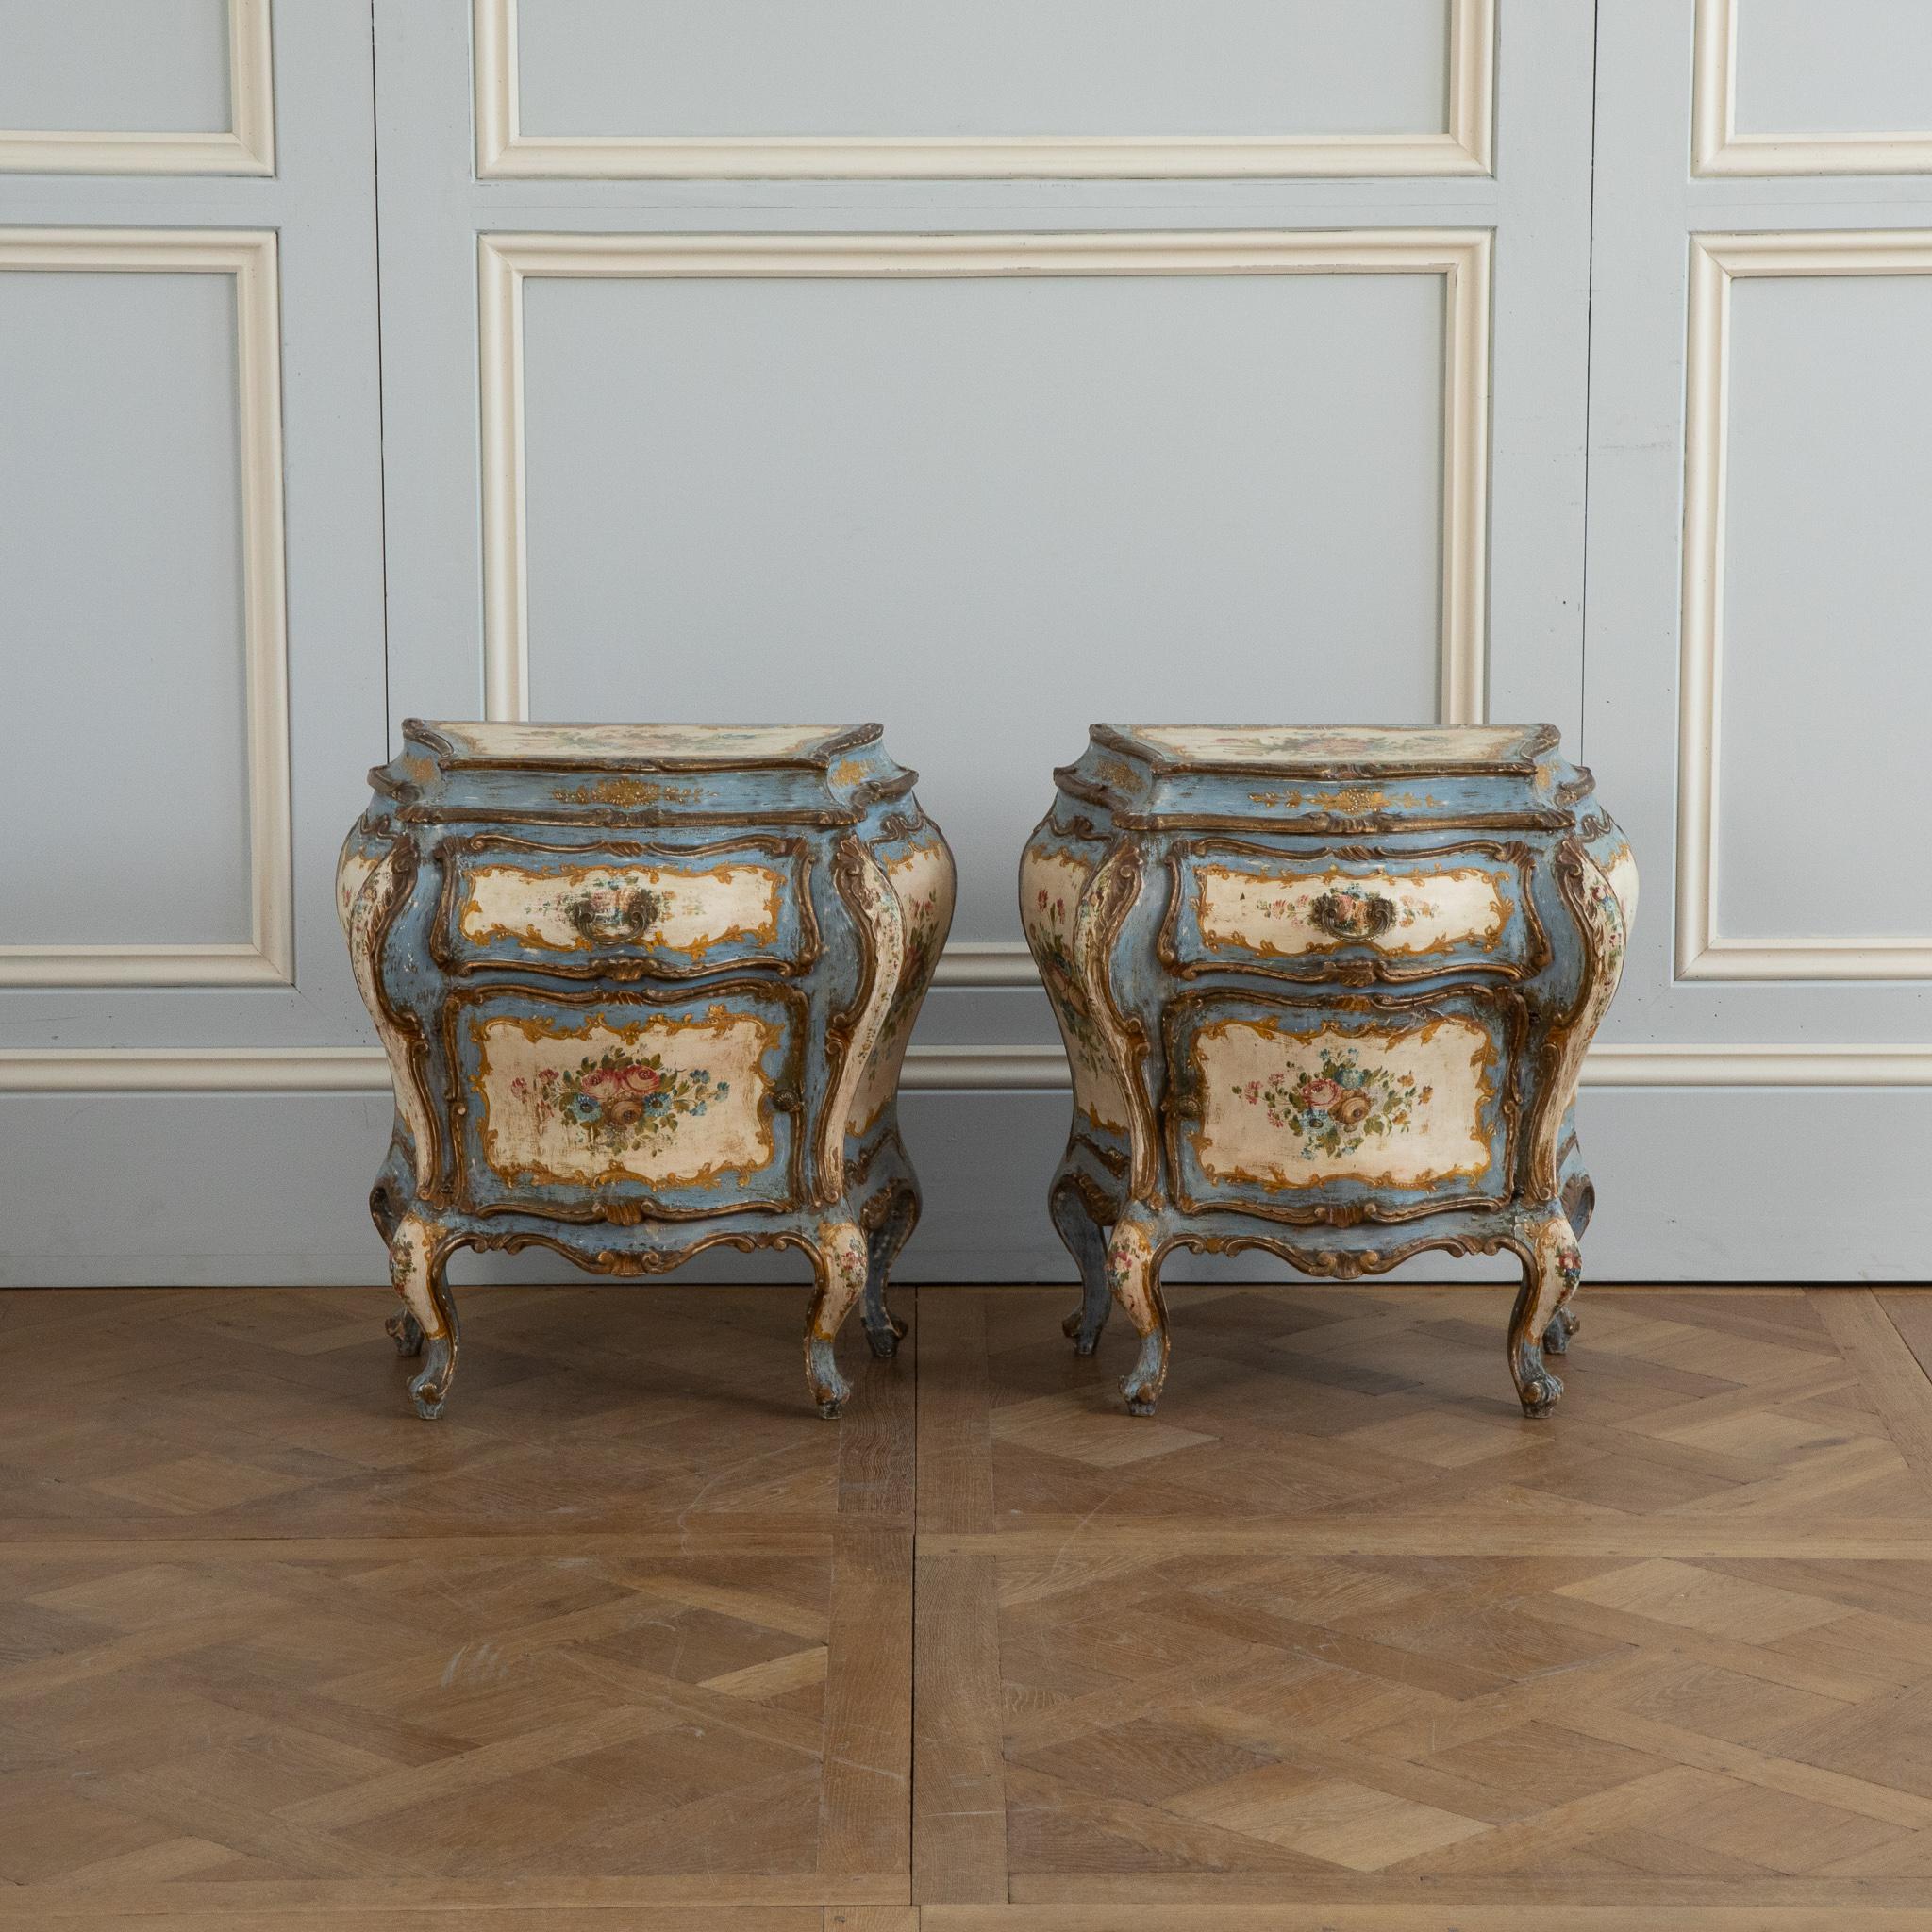 A vivacious Rococo style Tuscanian Pair of bombe Night stands or Bedside tables from the early 1900's, hand painted with delicate floral motifs on the main colours of old white and cobalt blue with gilded highlights.